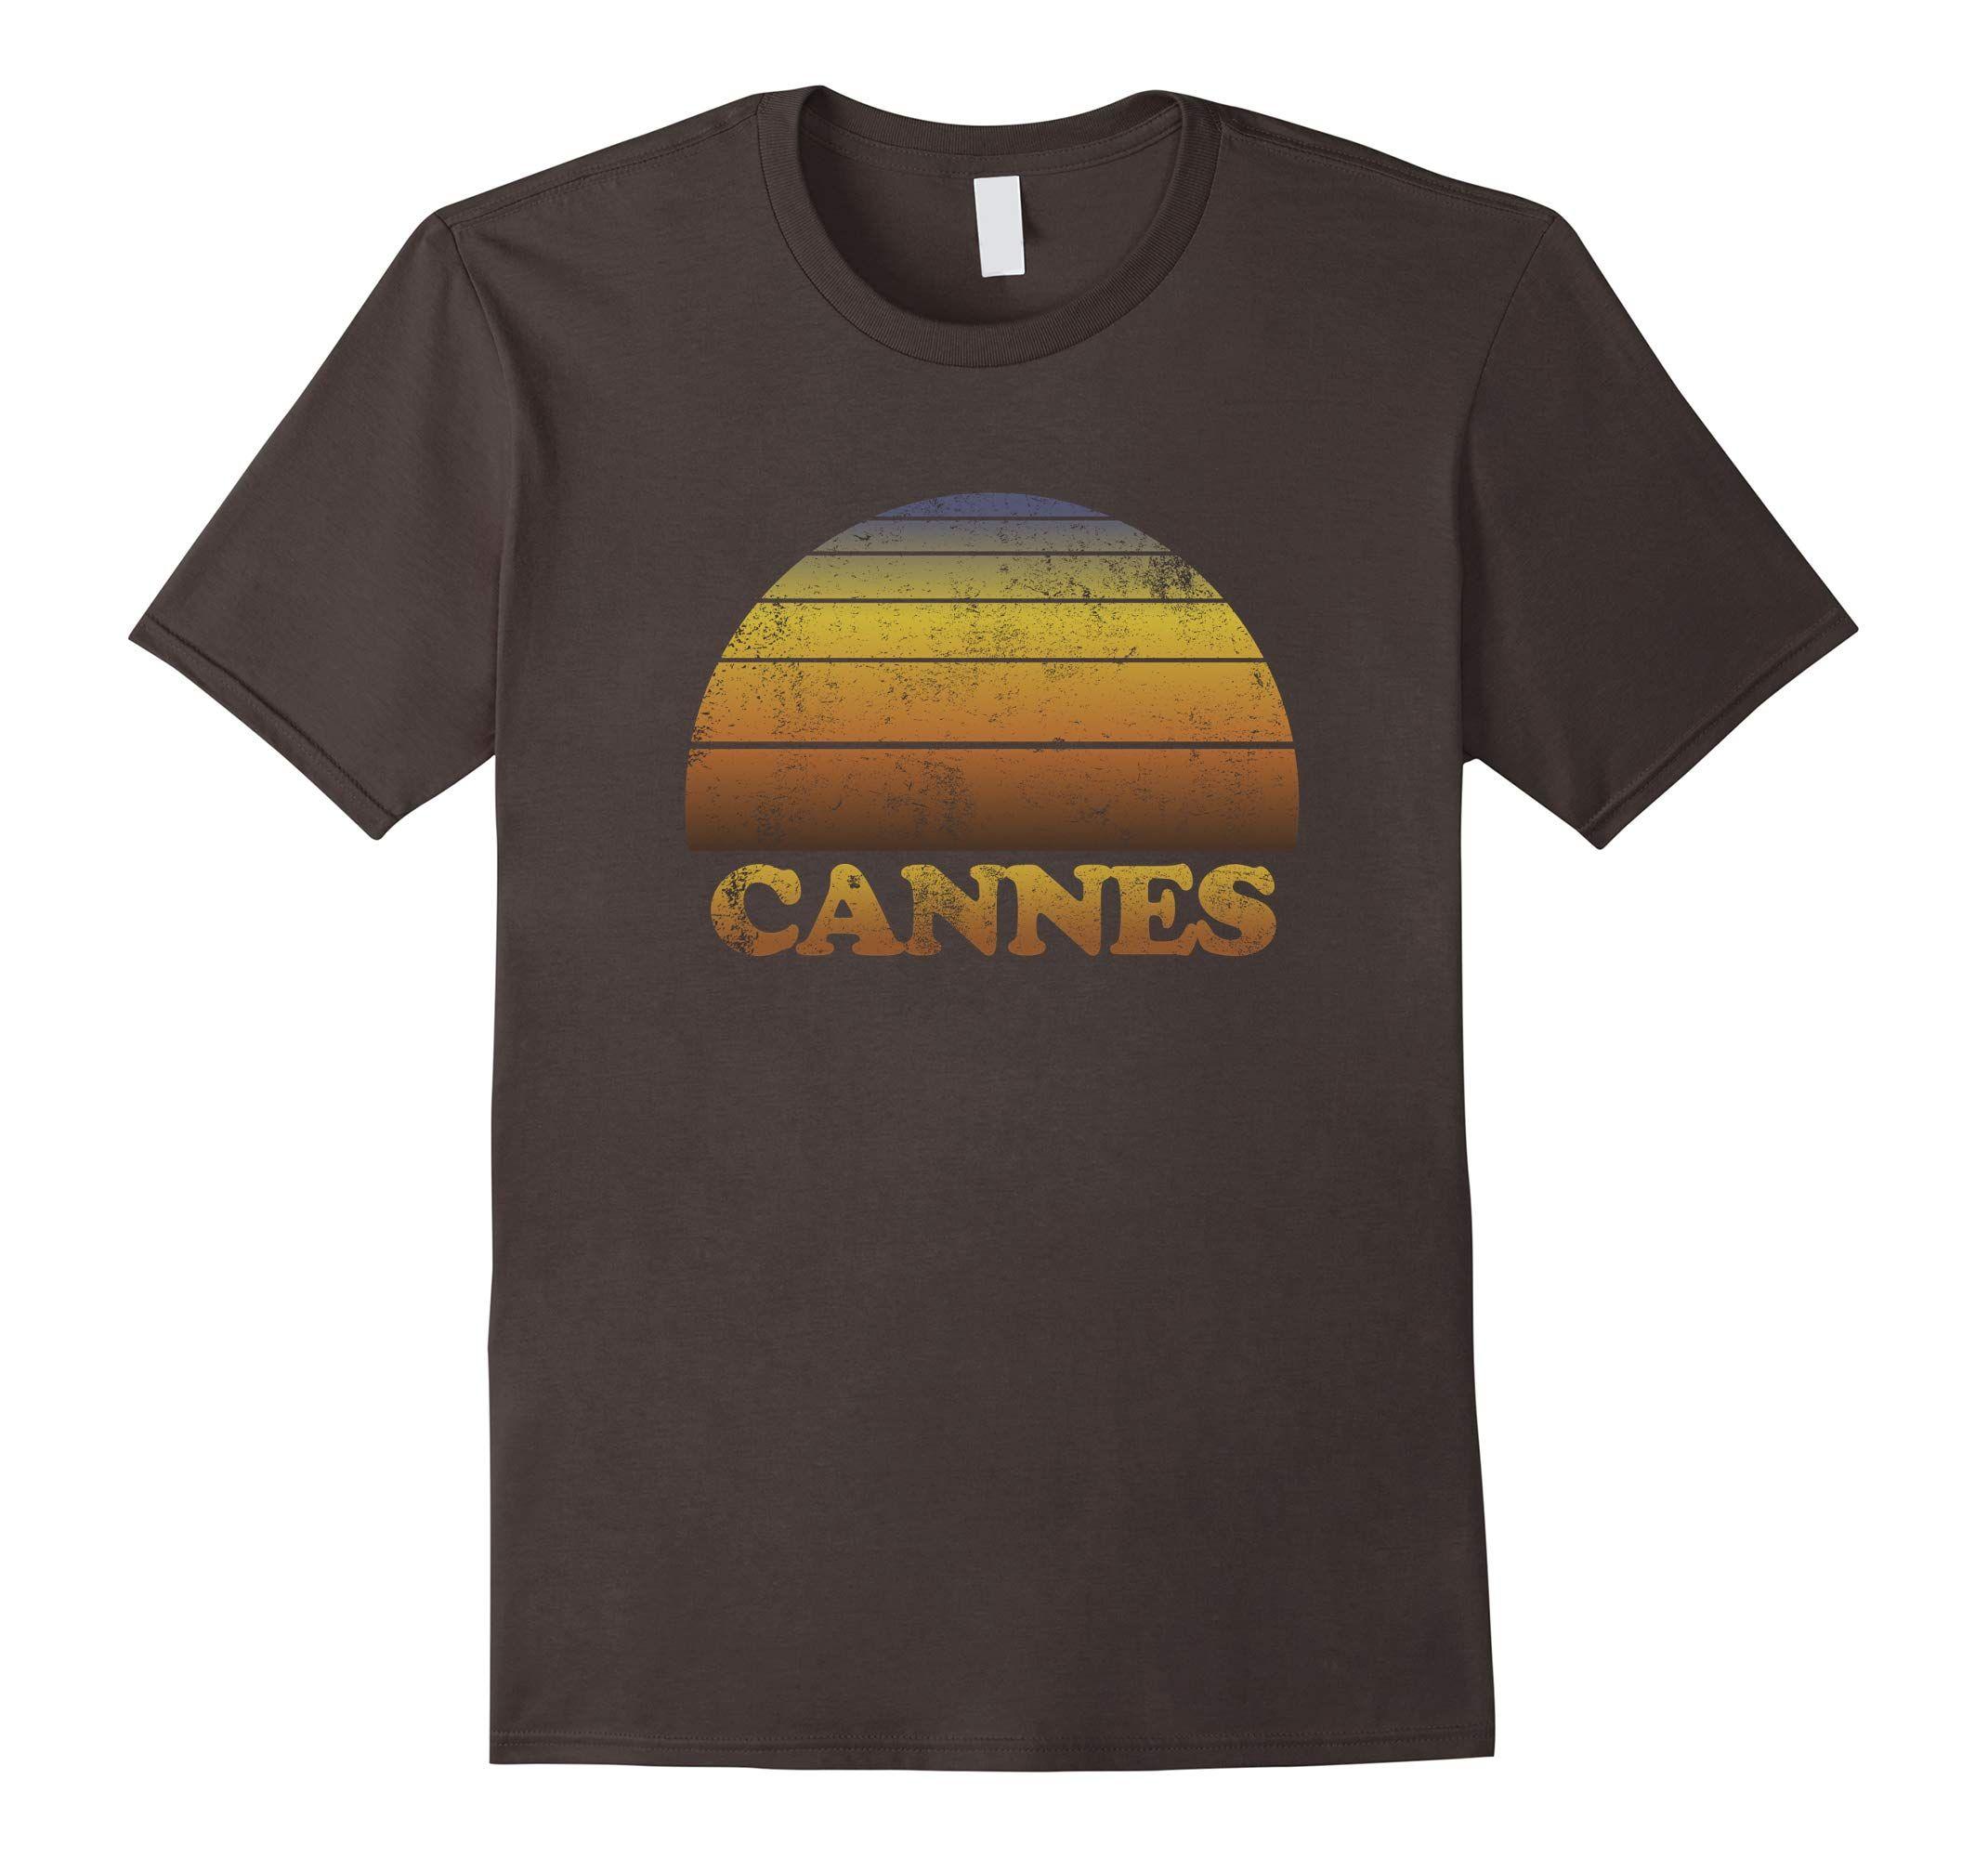 French Apparel Logo - Cannes France T Shirt Clothes Adult Teen French Apparel-ah my shirt ...